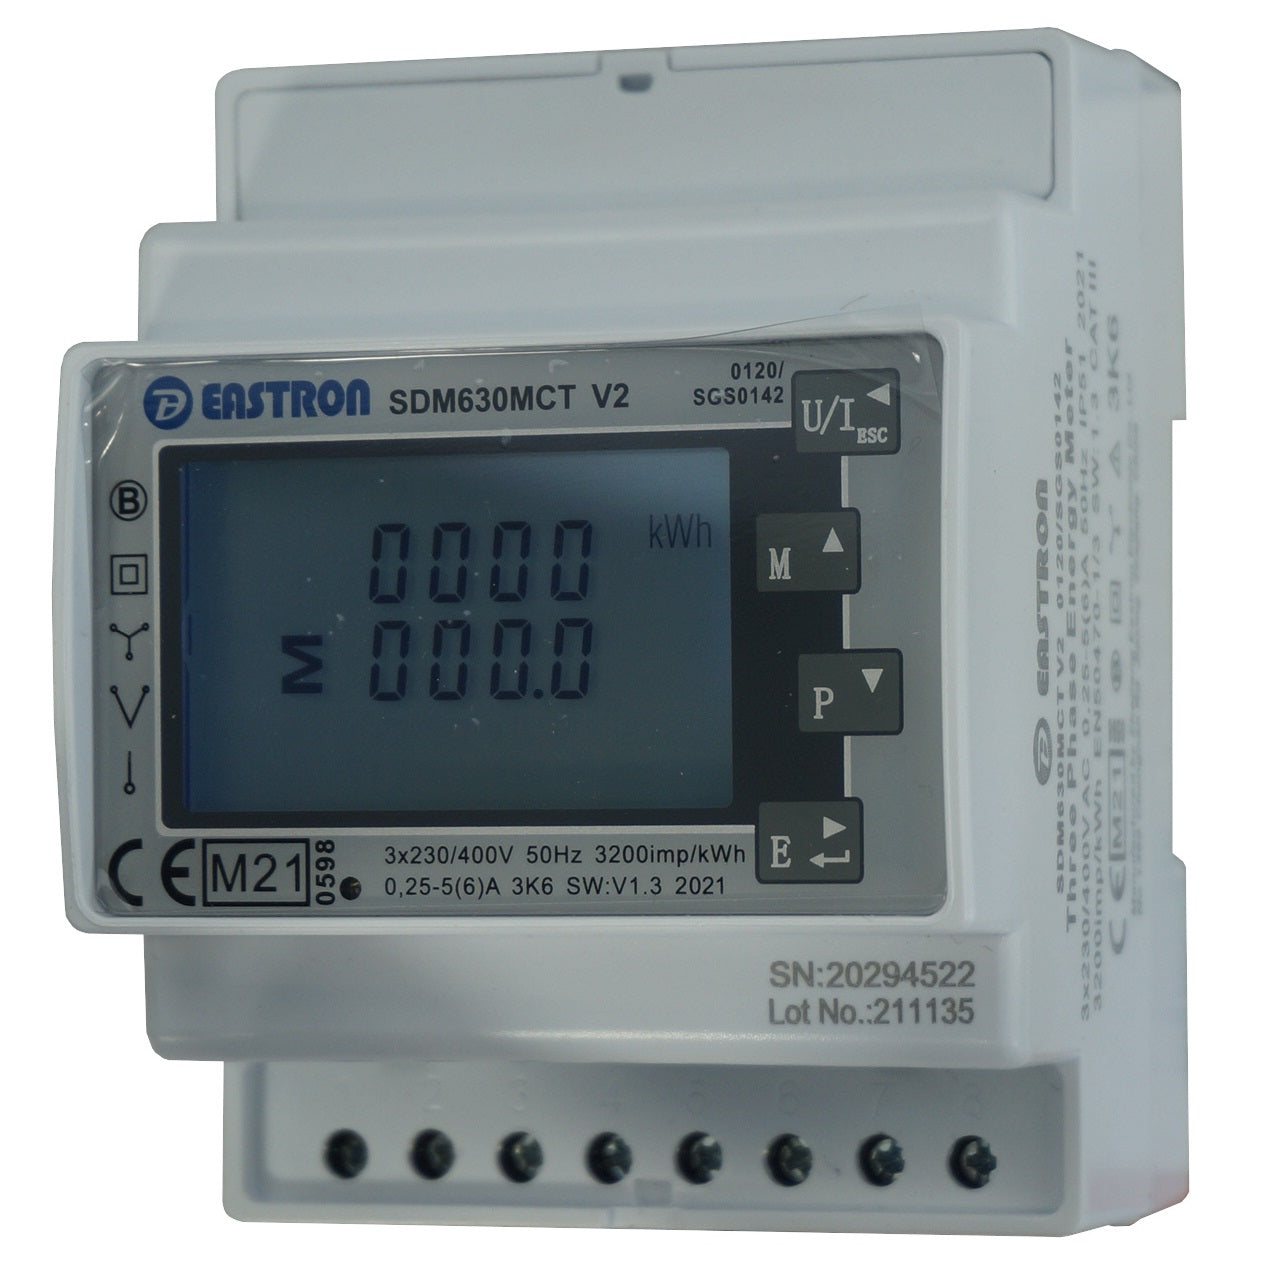 SDM630MCT Modbus-CL1 V2-GROWATT-SOLAX, DIN Rail Mount kWh Meter, 3 Phase, 240VAC aux, Class 1, 1/5 Amp CT Connect, w/ 2 x pulse outputs and RS485 Modbus RTU Comms